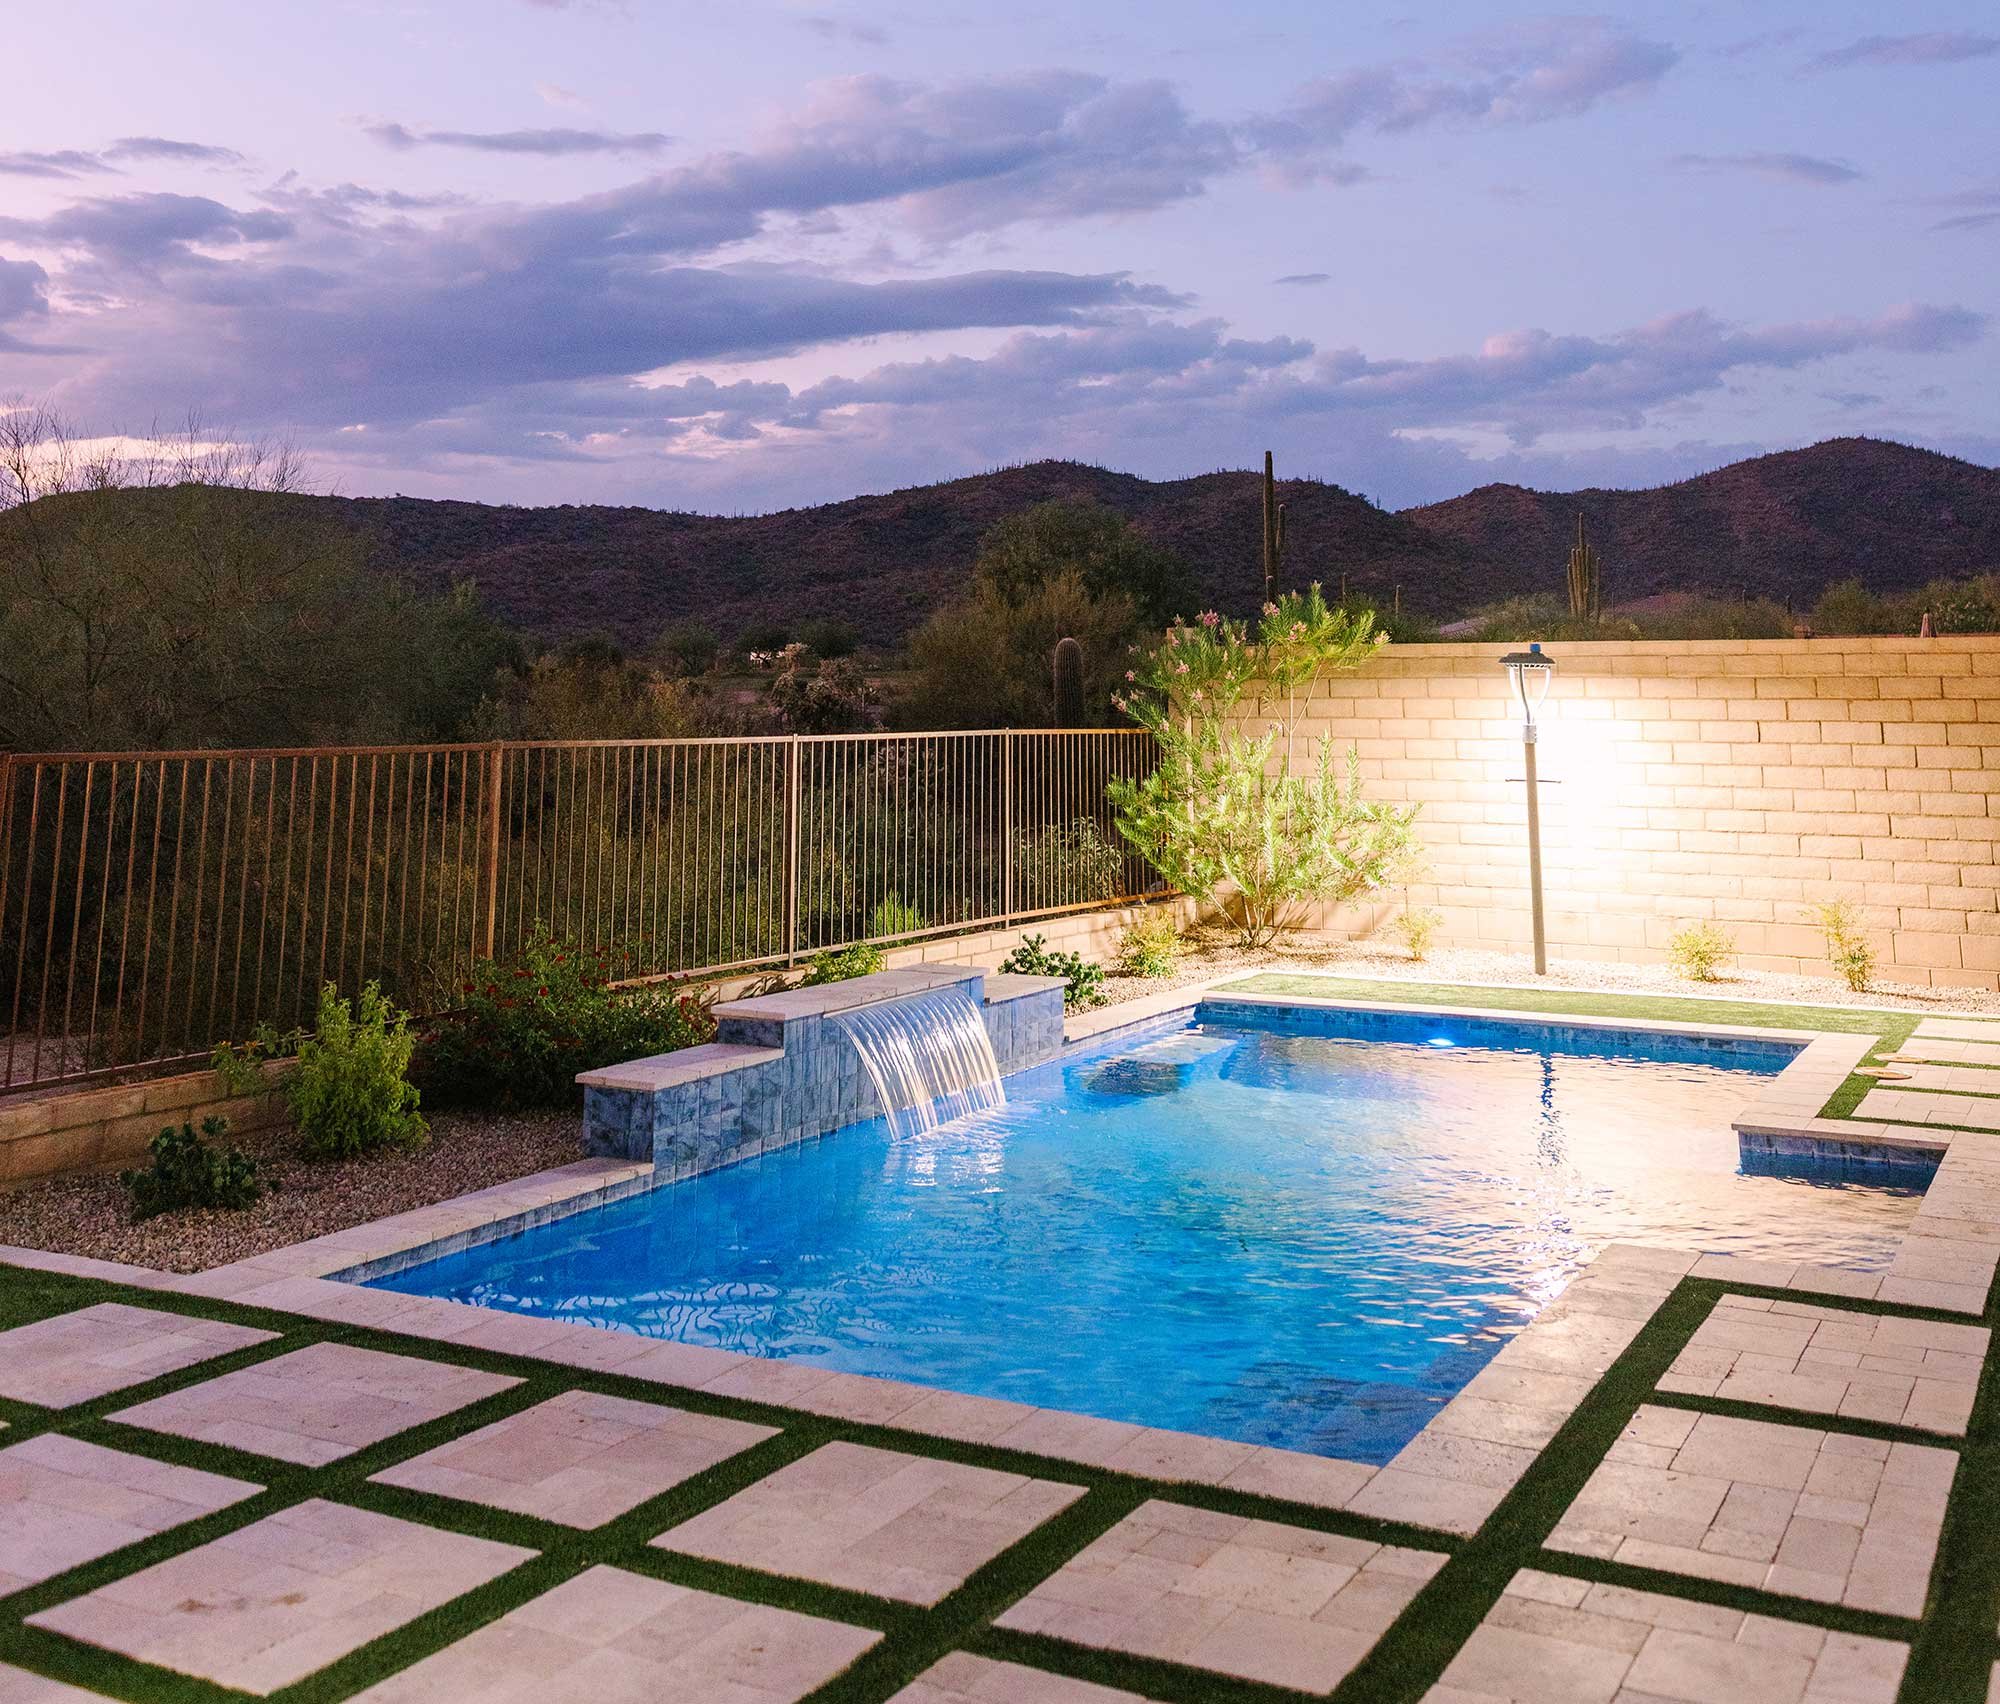 Light fixtures cast light downward to minimize light pollution while keeping the pool open for business after dark.